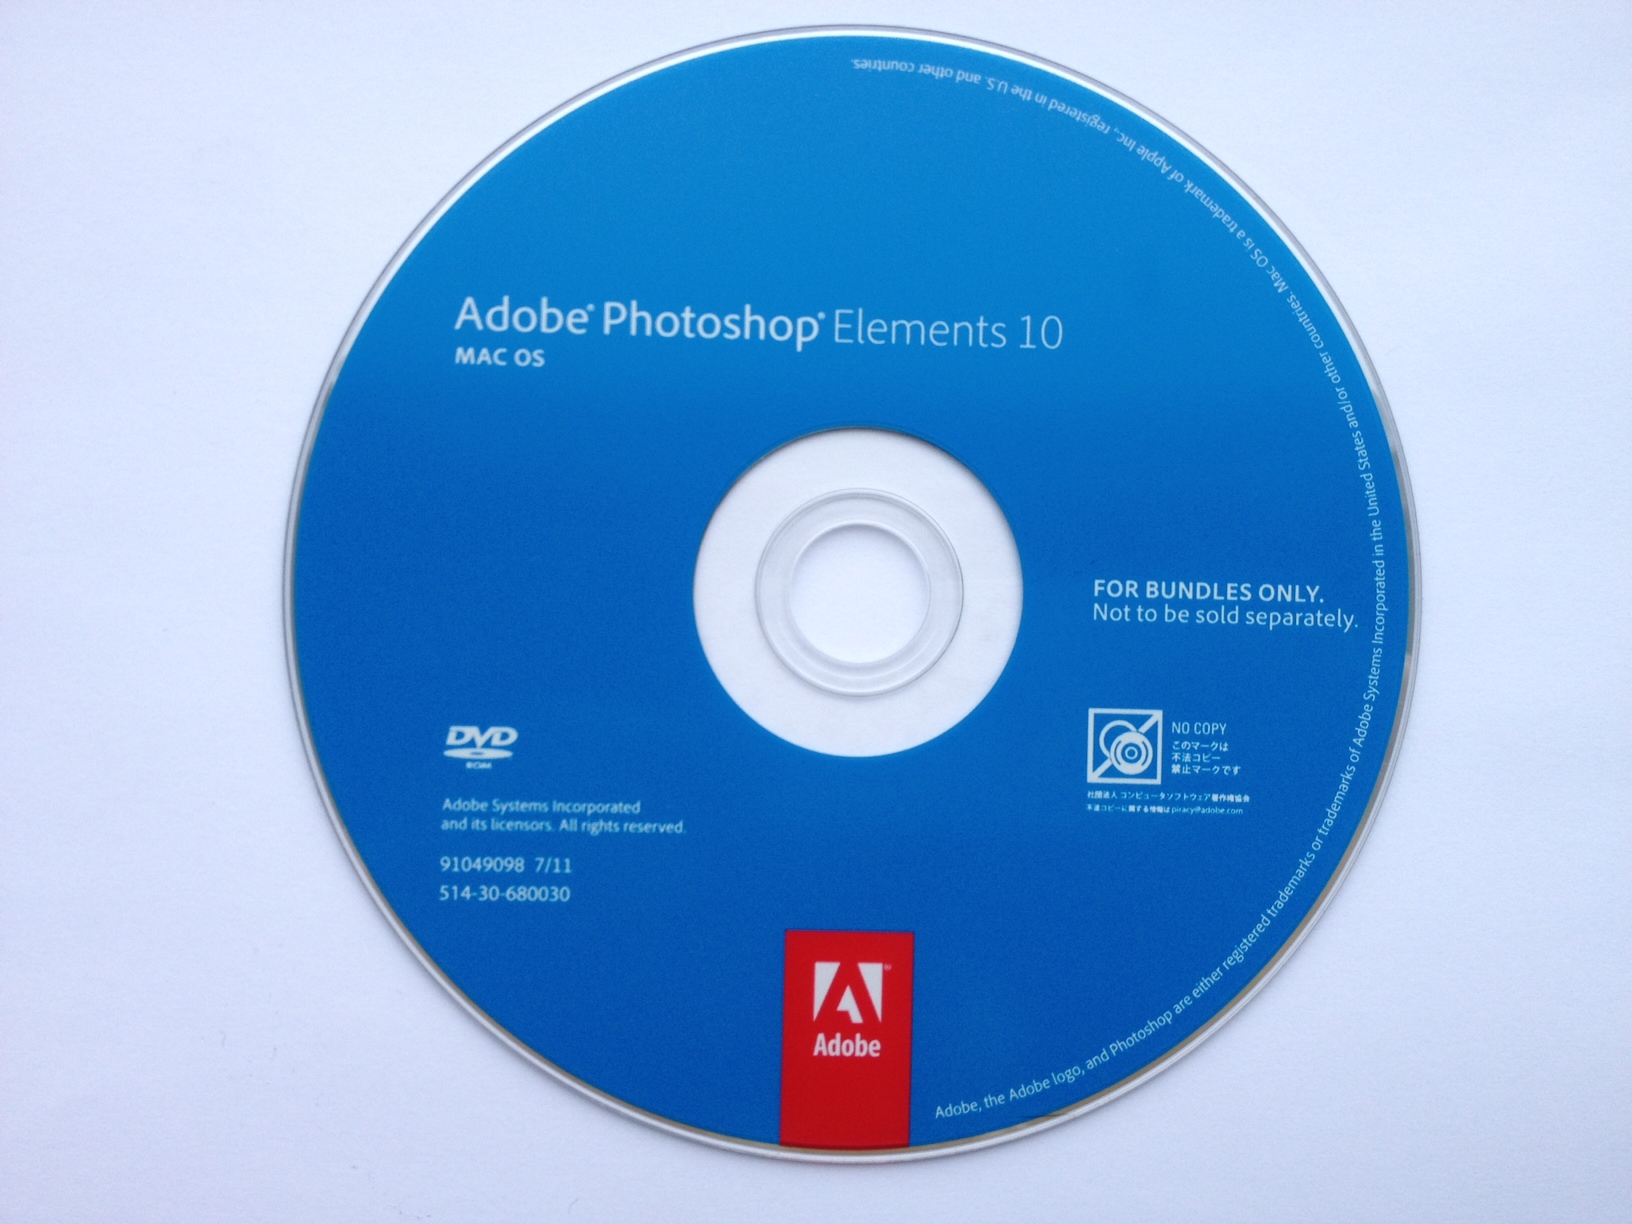 installing adobe photoshop elements 11 serial number